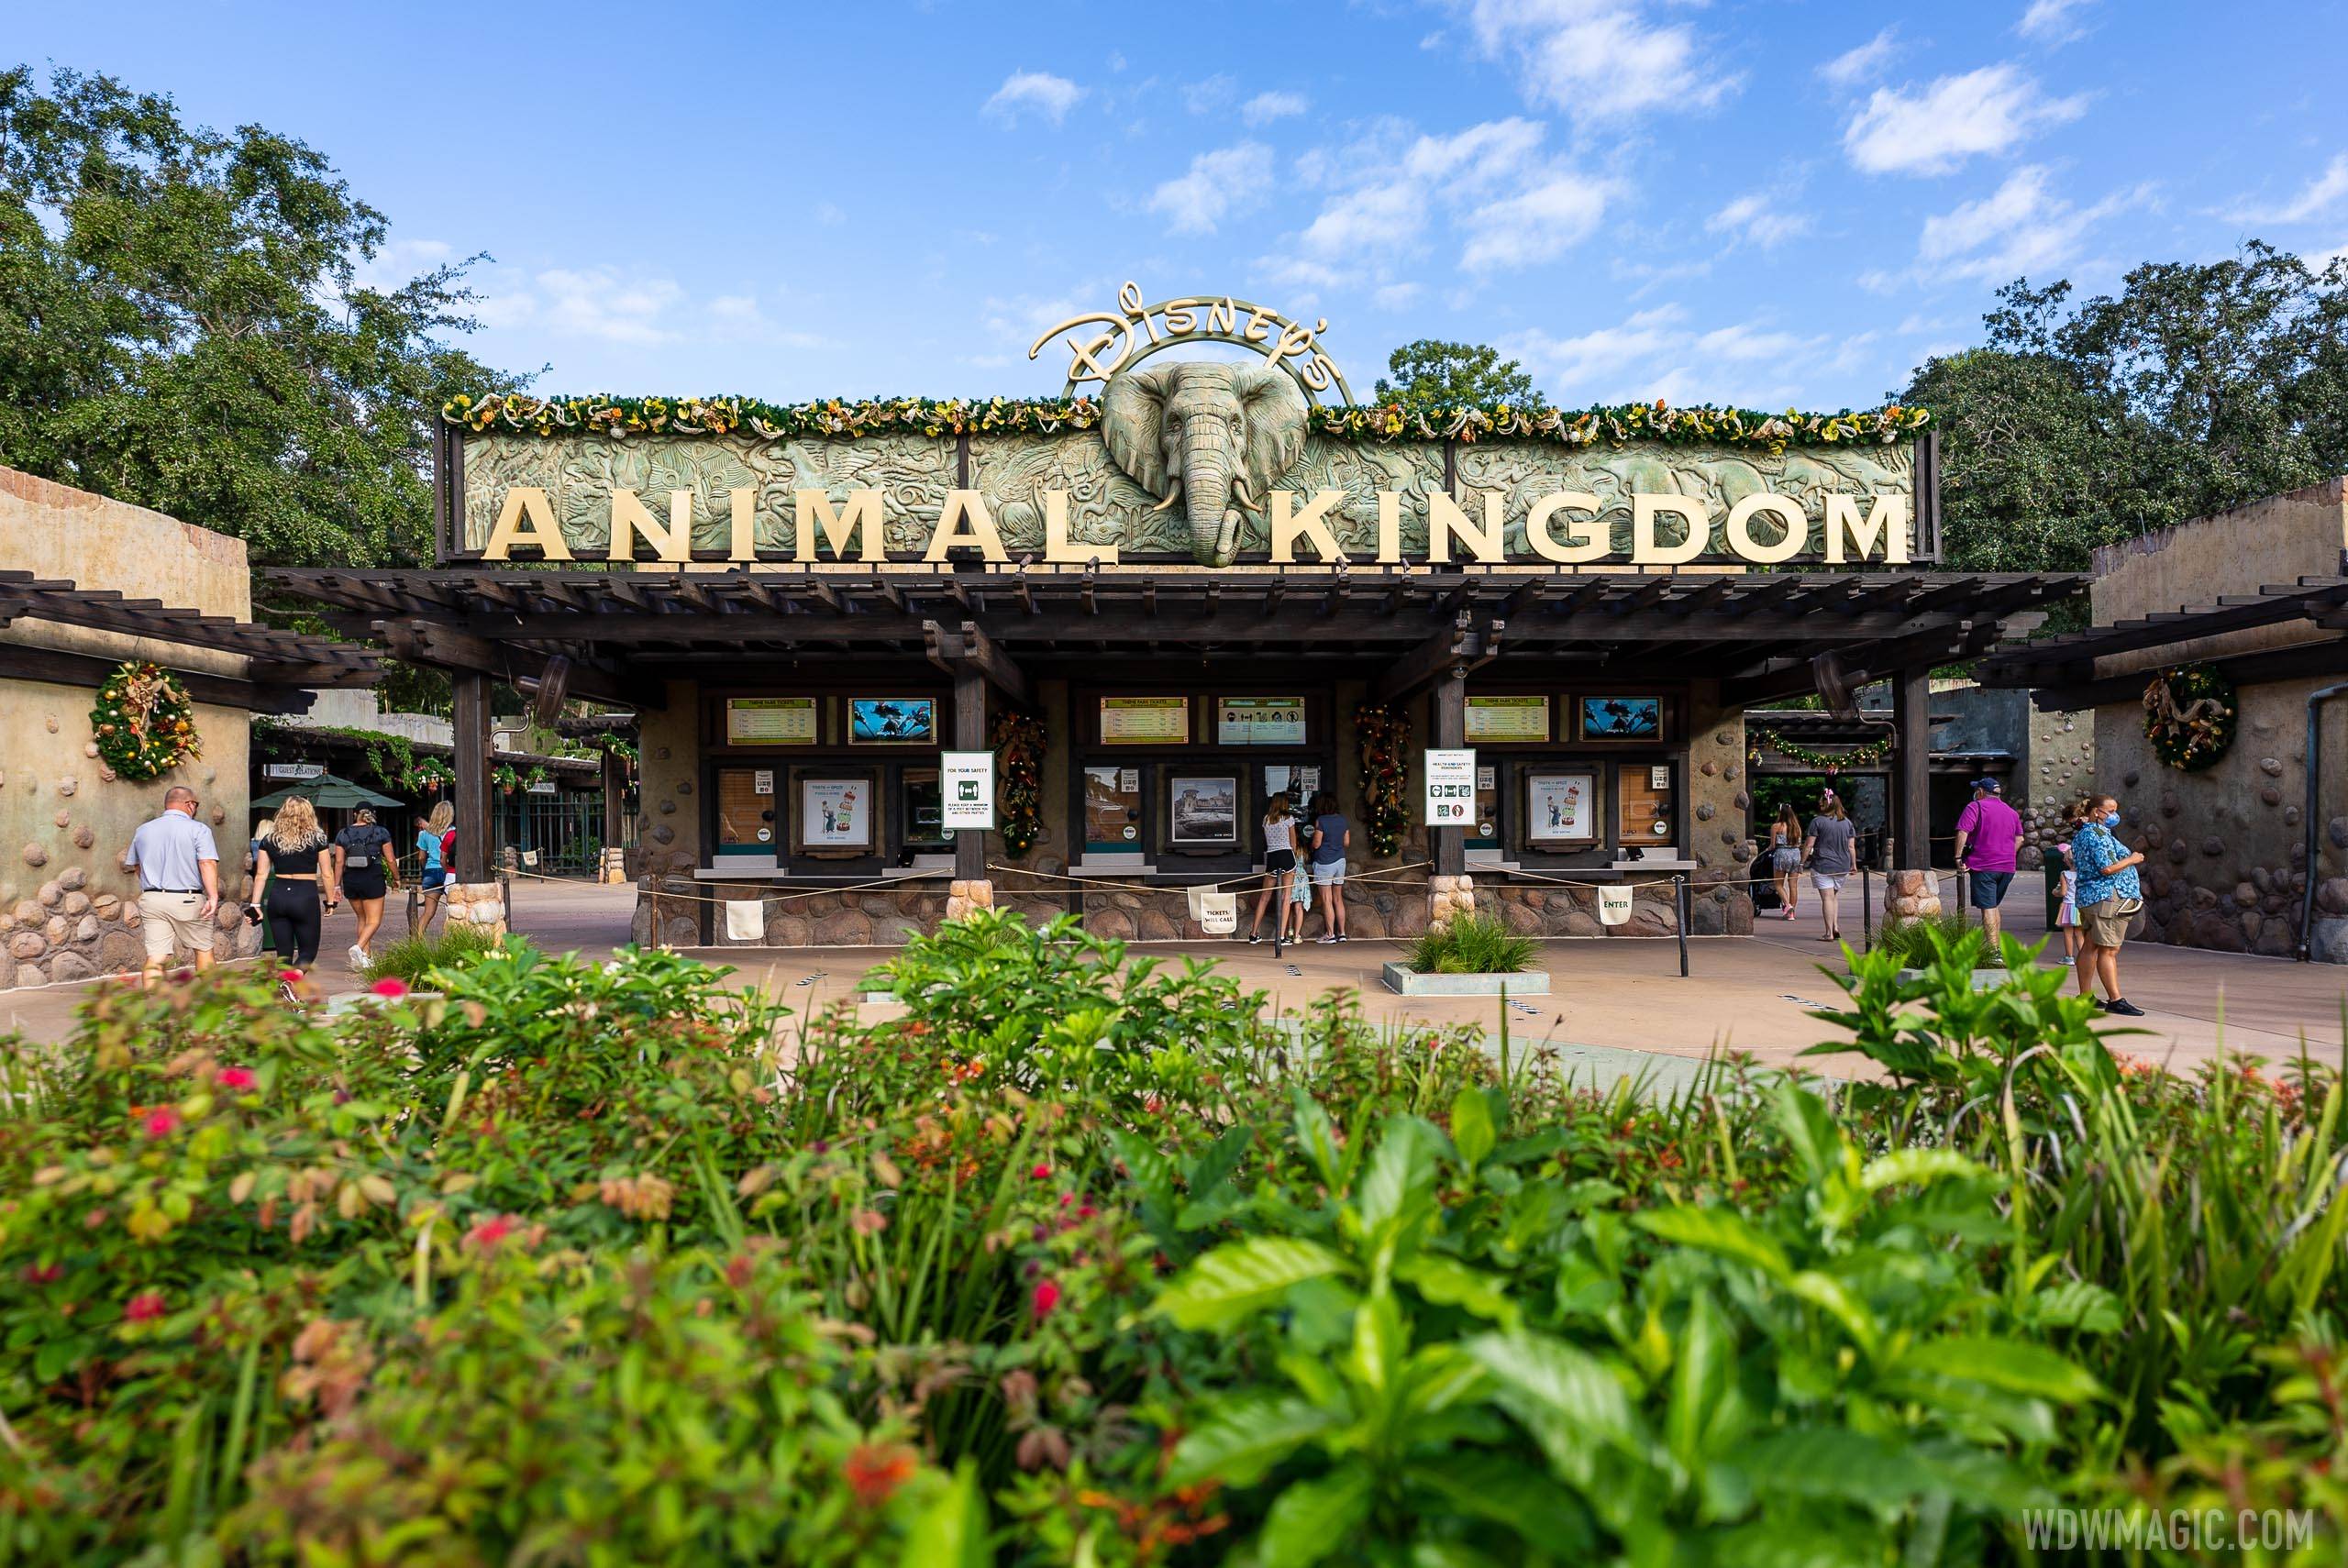 Disney's Animal Kingdom now has more 8am openings and 8pm closures in December